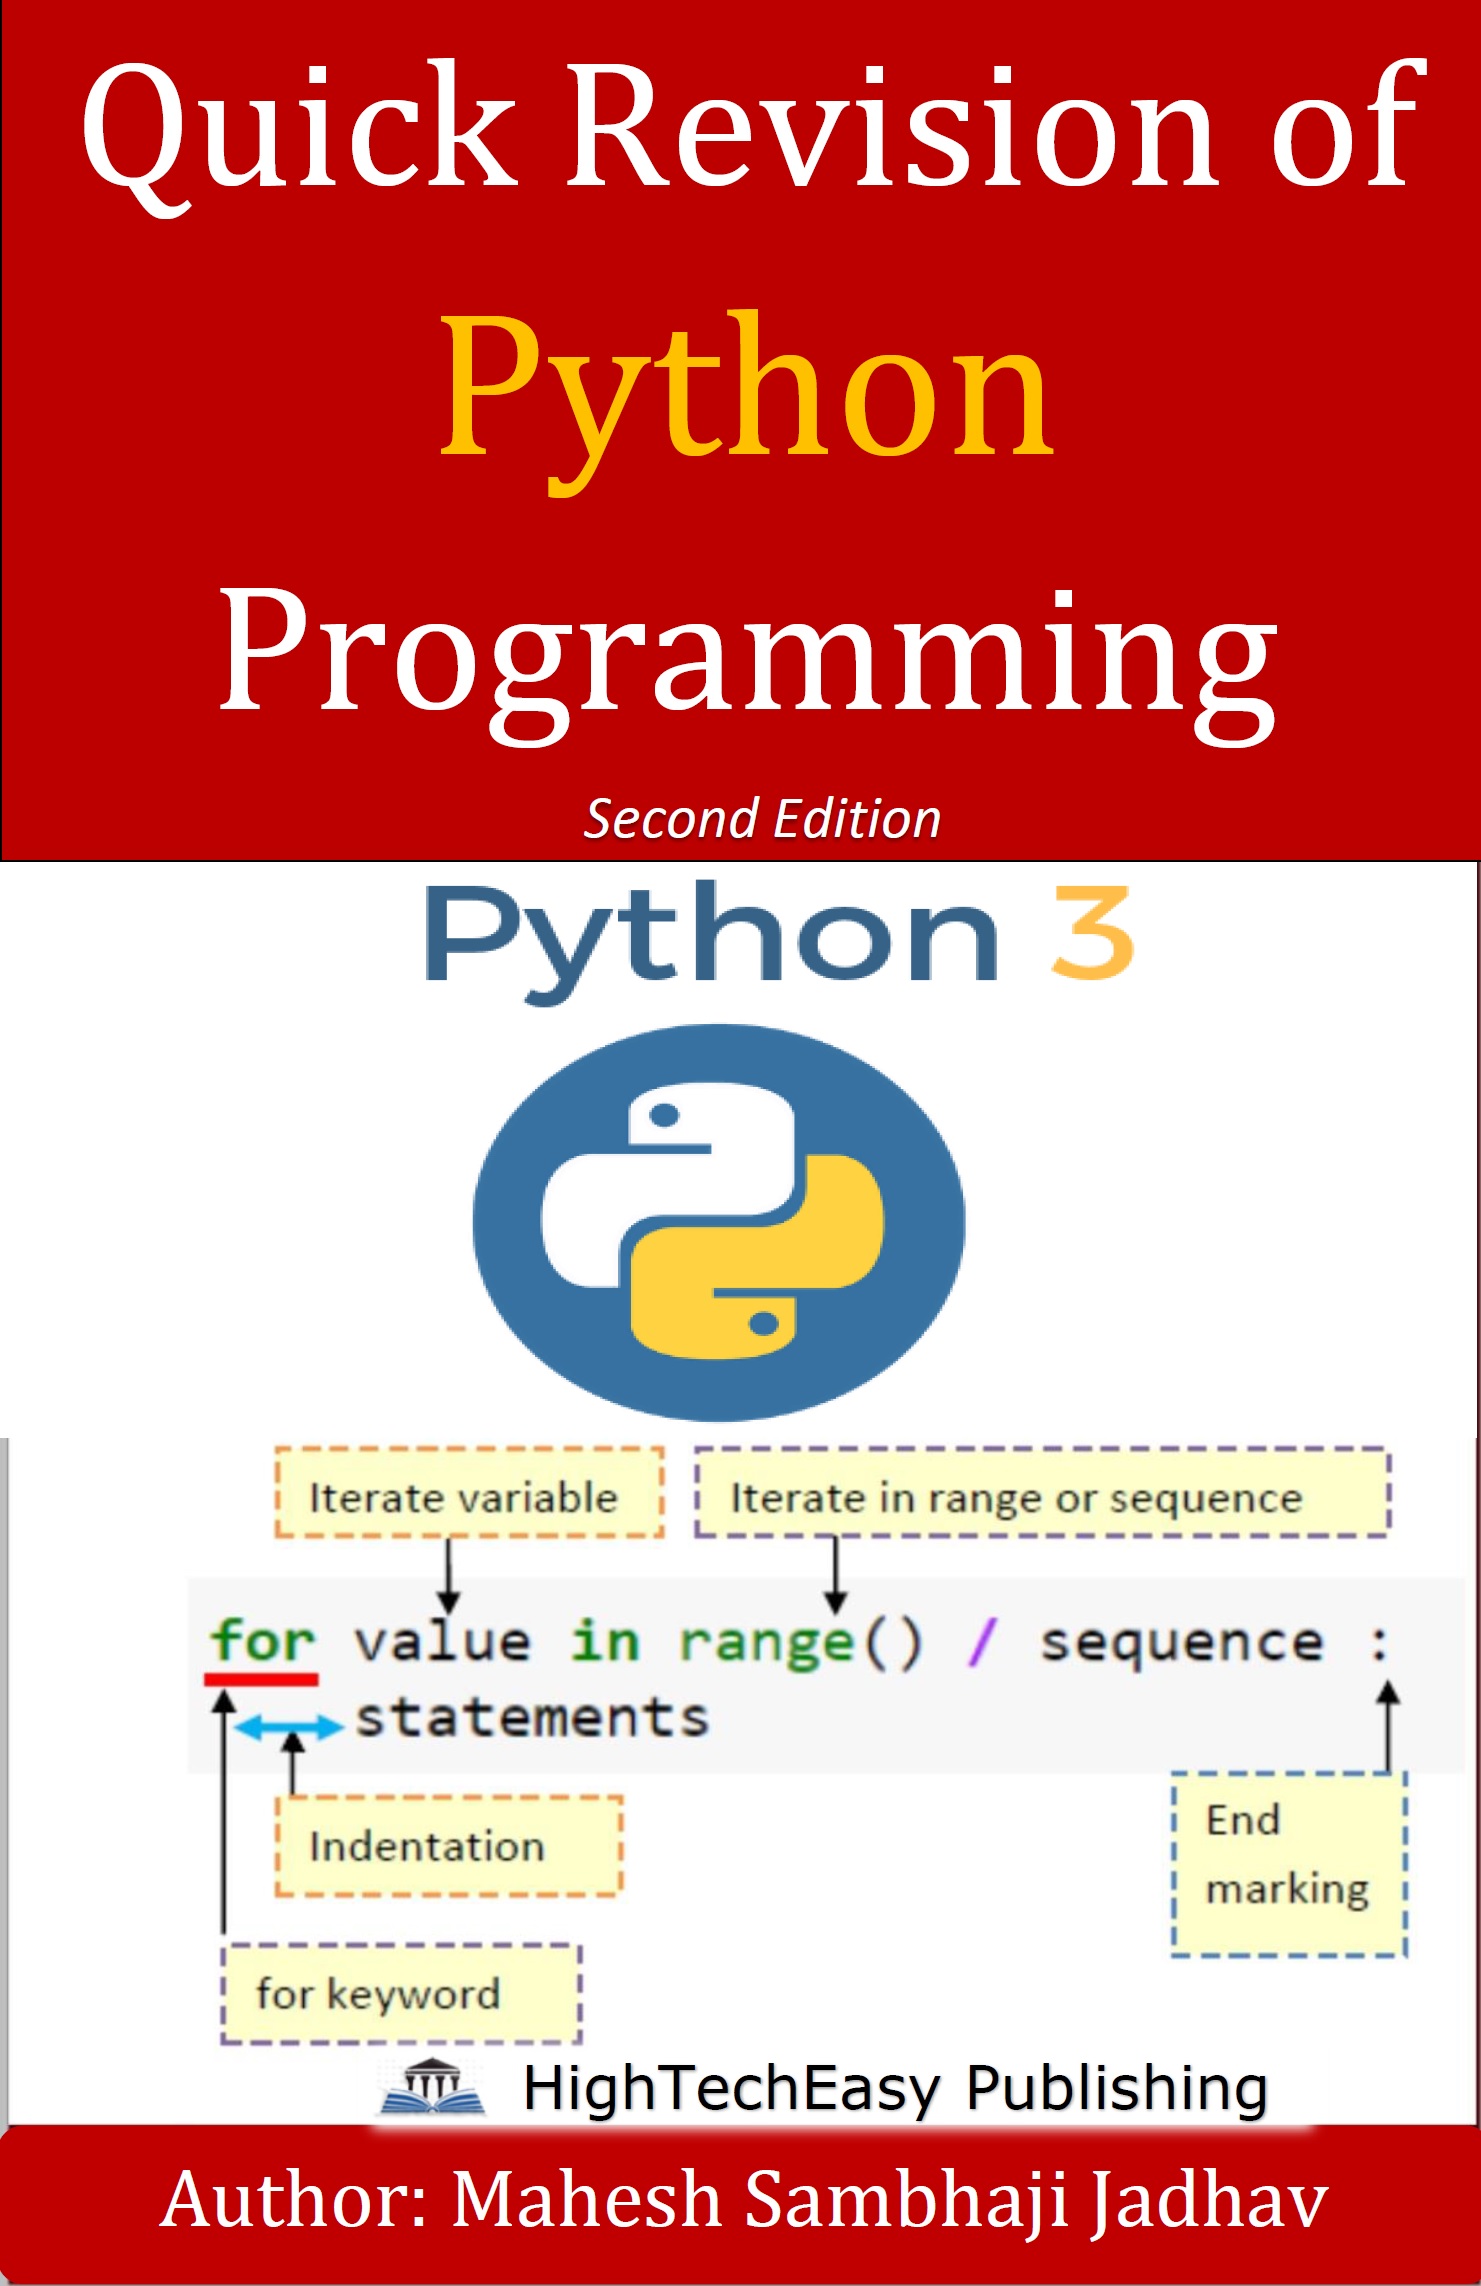 Quick Revision of Python programming